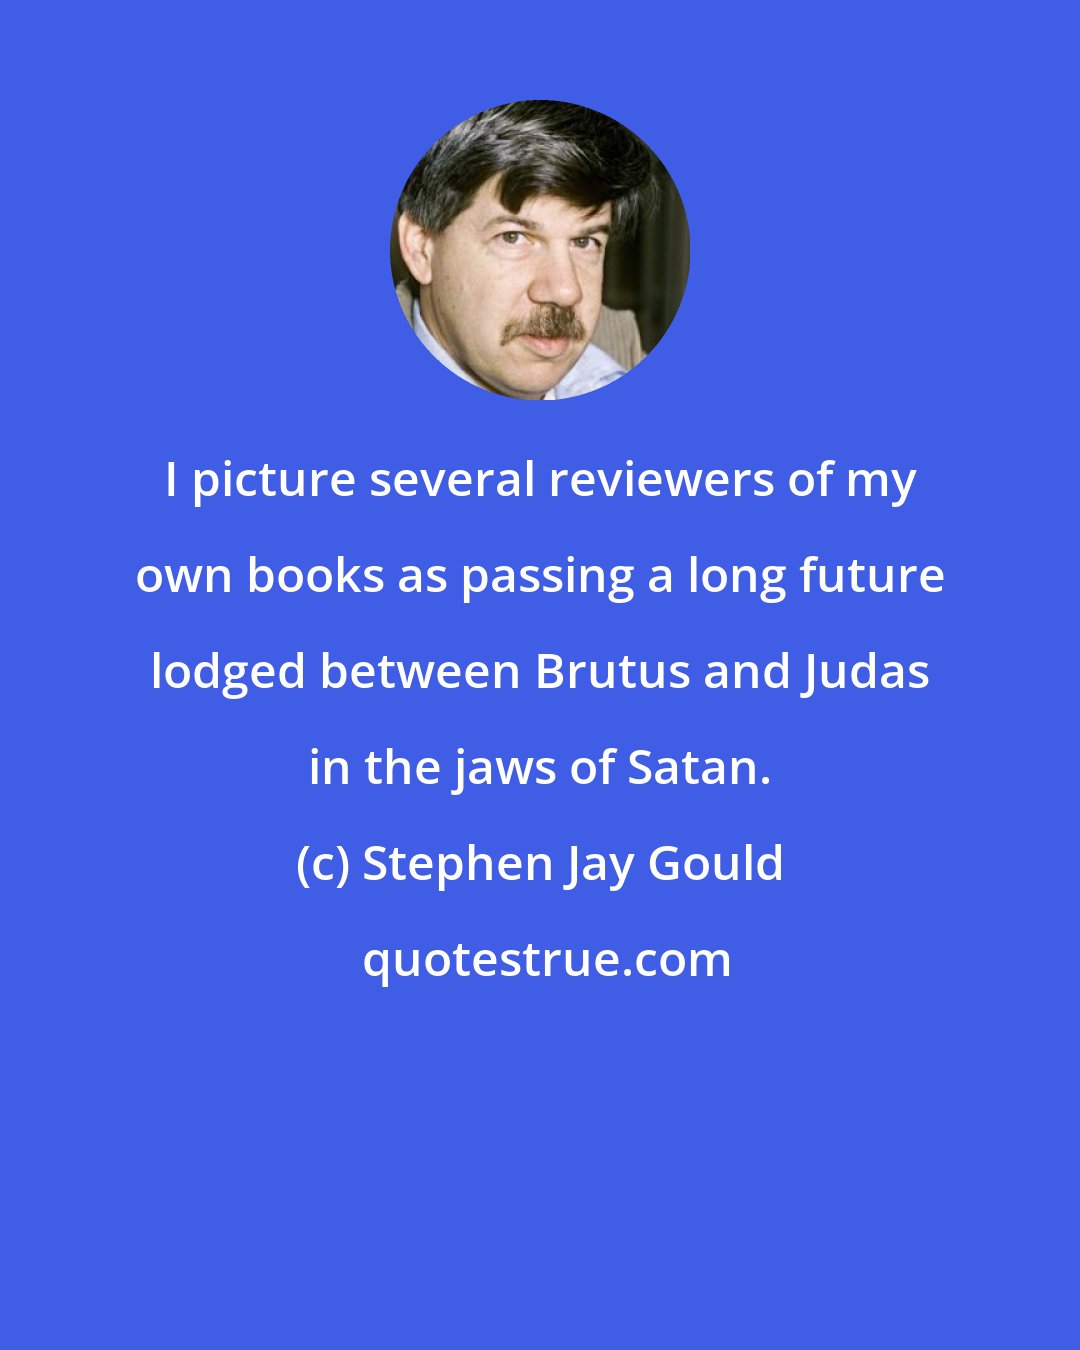 Stephen Jay Gould: I picture several reviewers of my own books as passing a long future lodged between Brutus and Judas in the jaws of Satan.